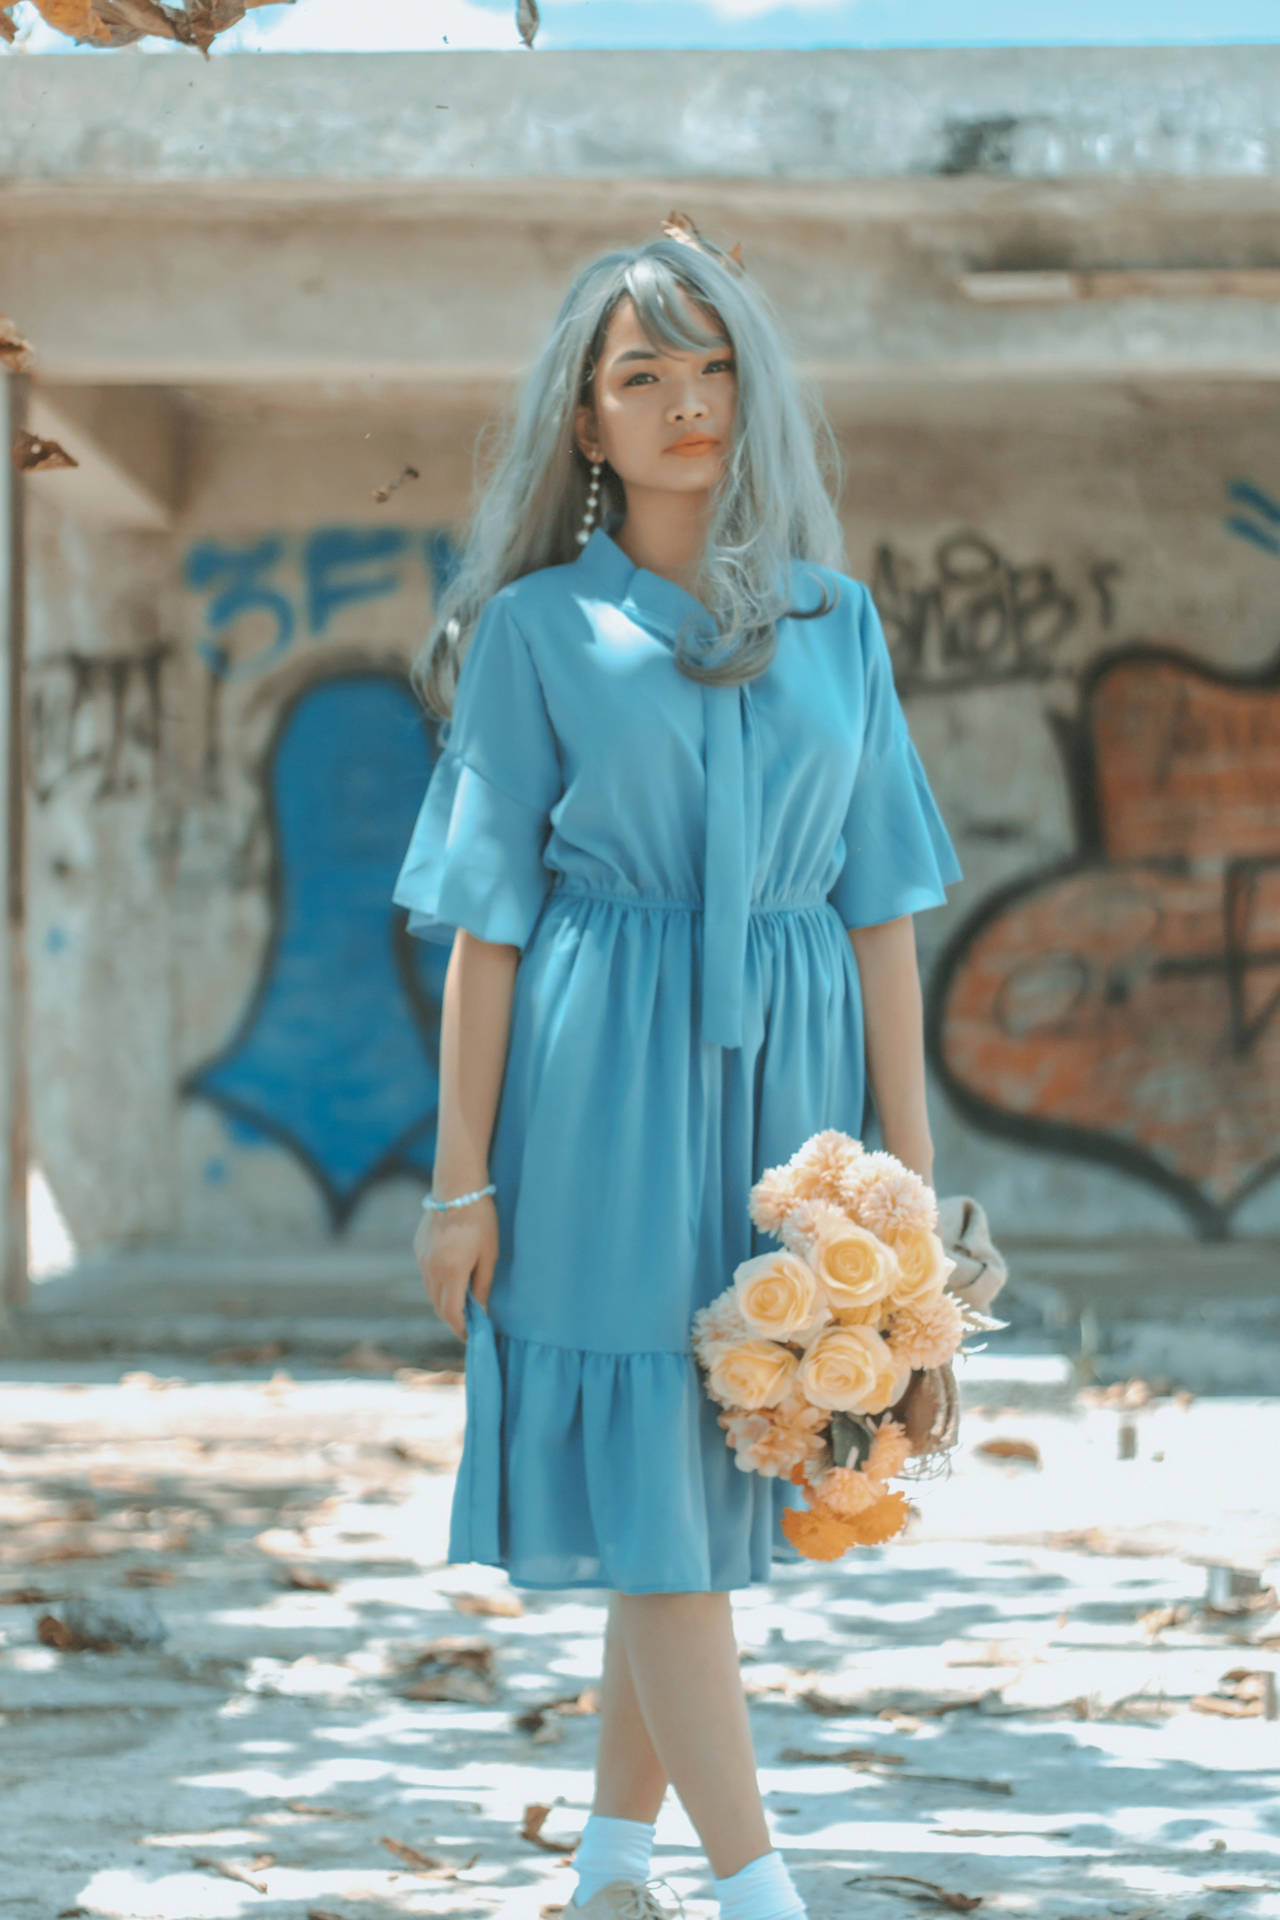 Cute Girl With Silver Hair In Blue Dress